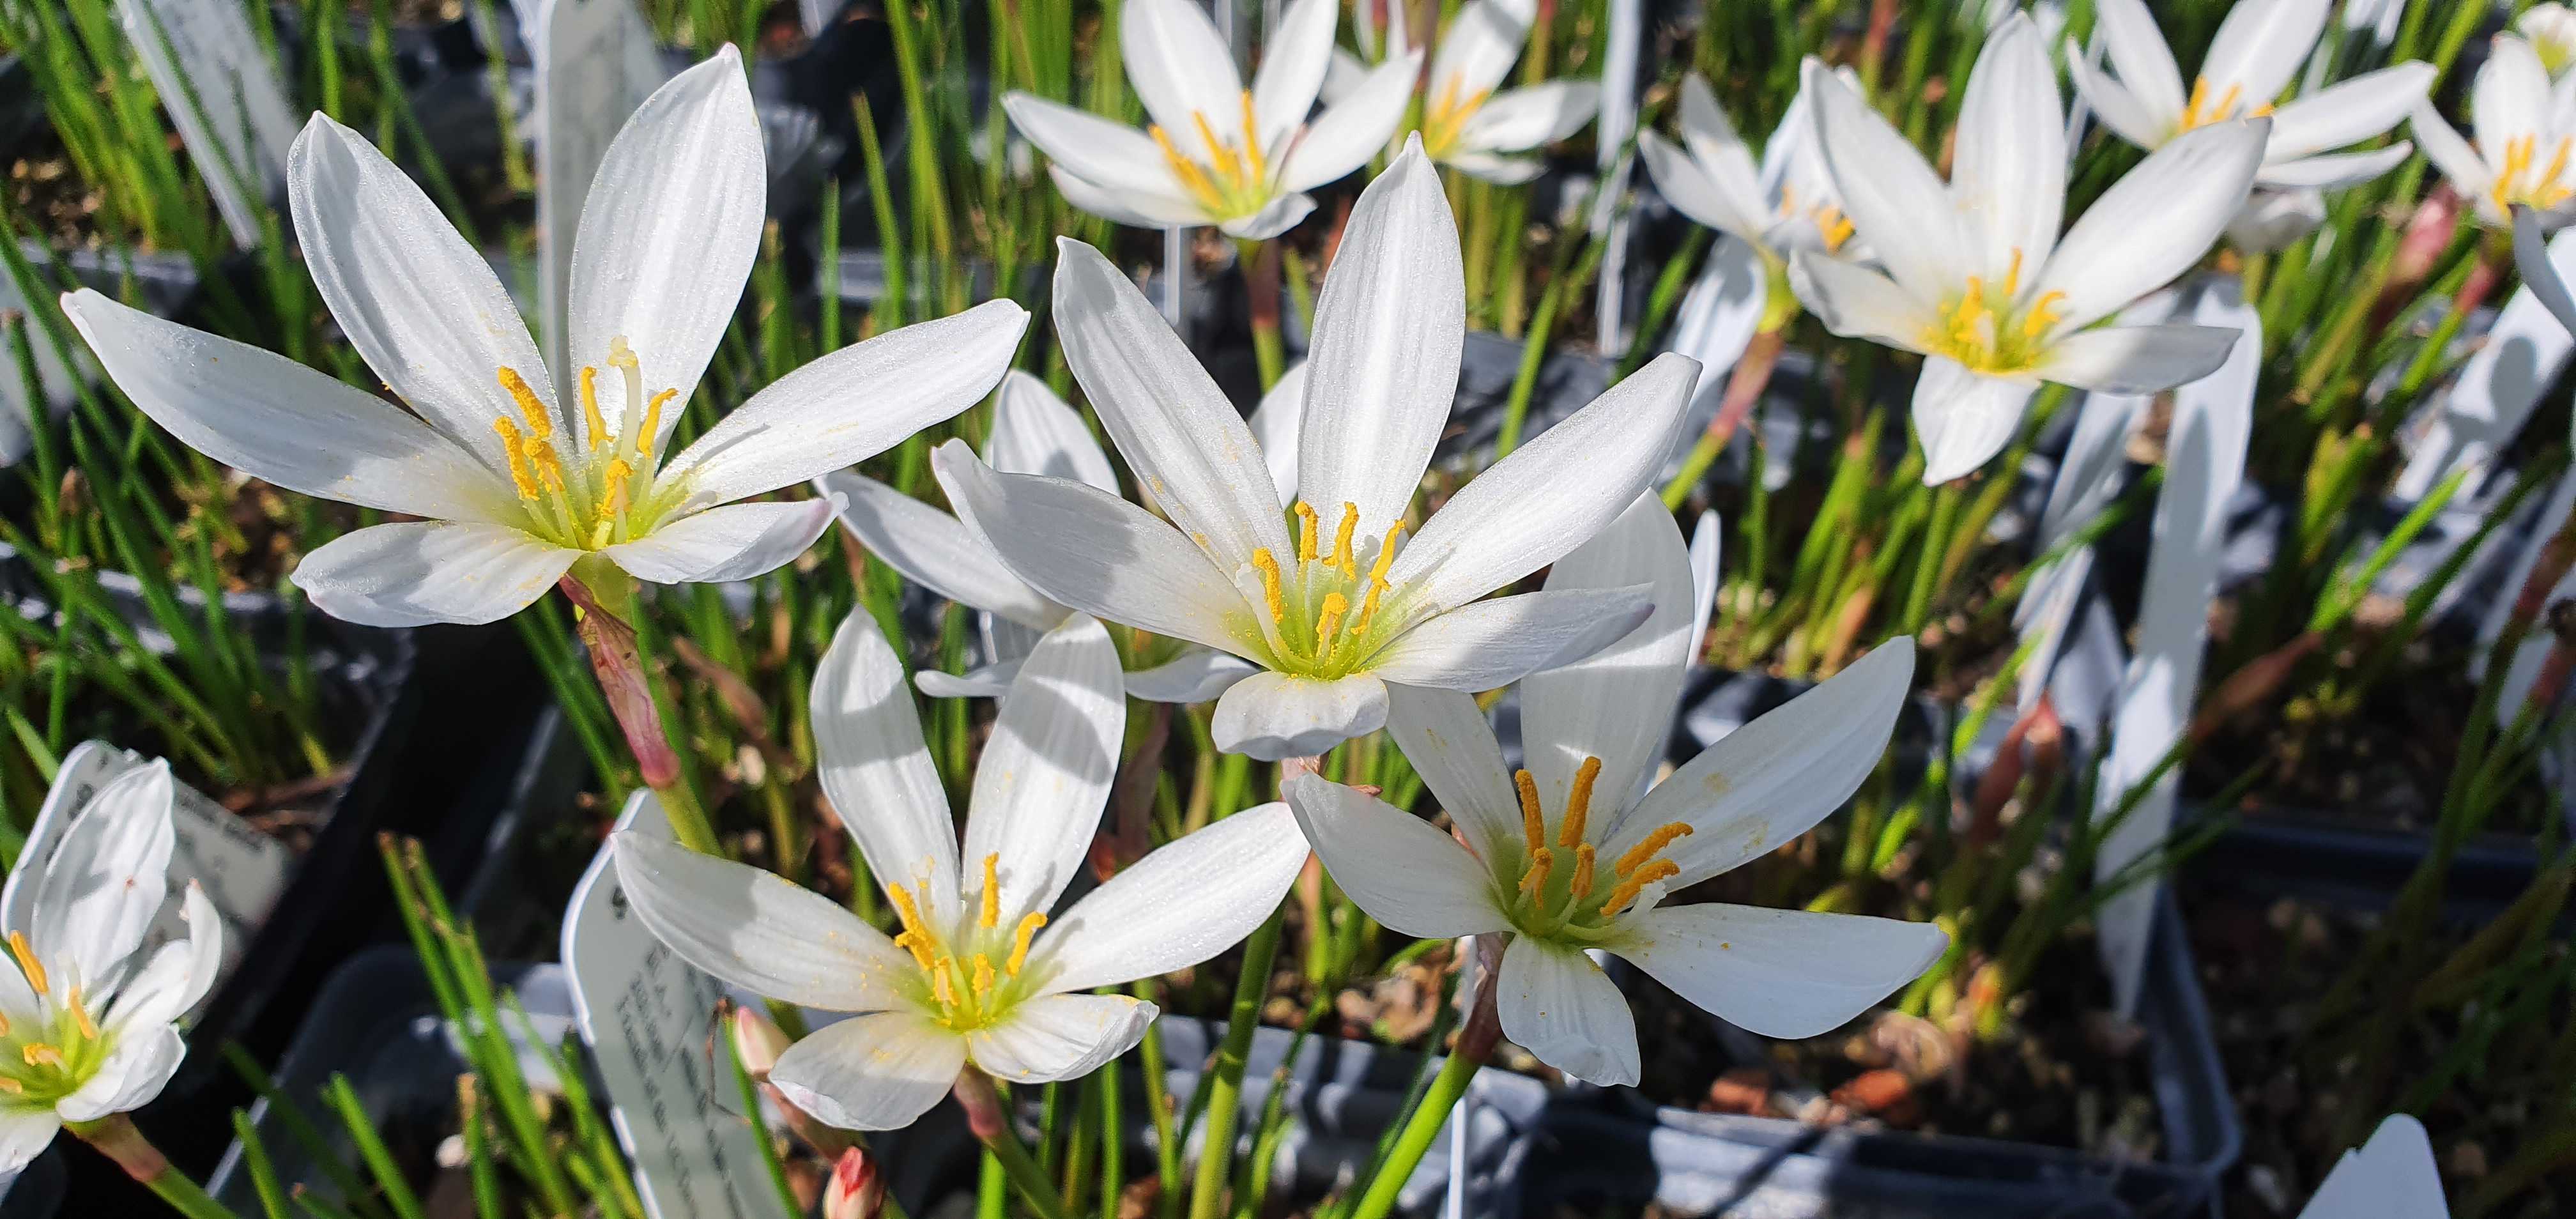 Image of Argentine rain lily in bloom with lots of white flowers.